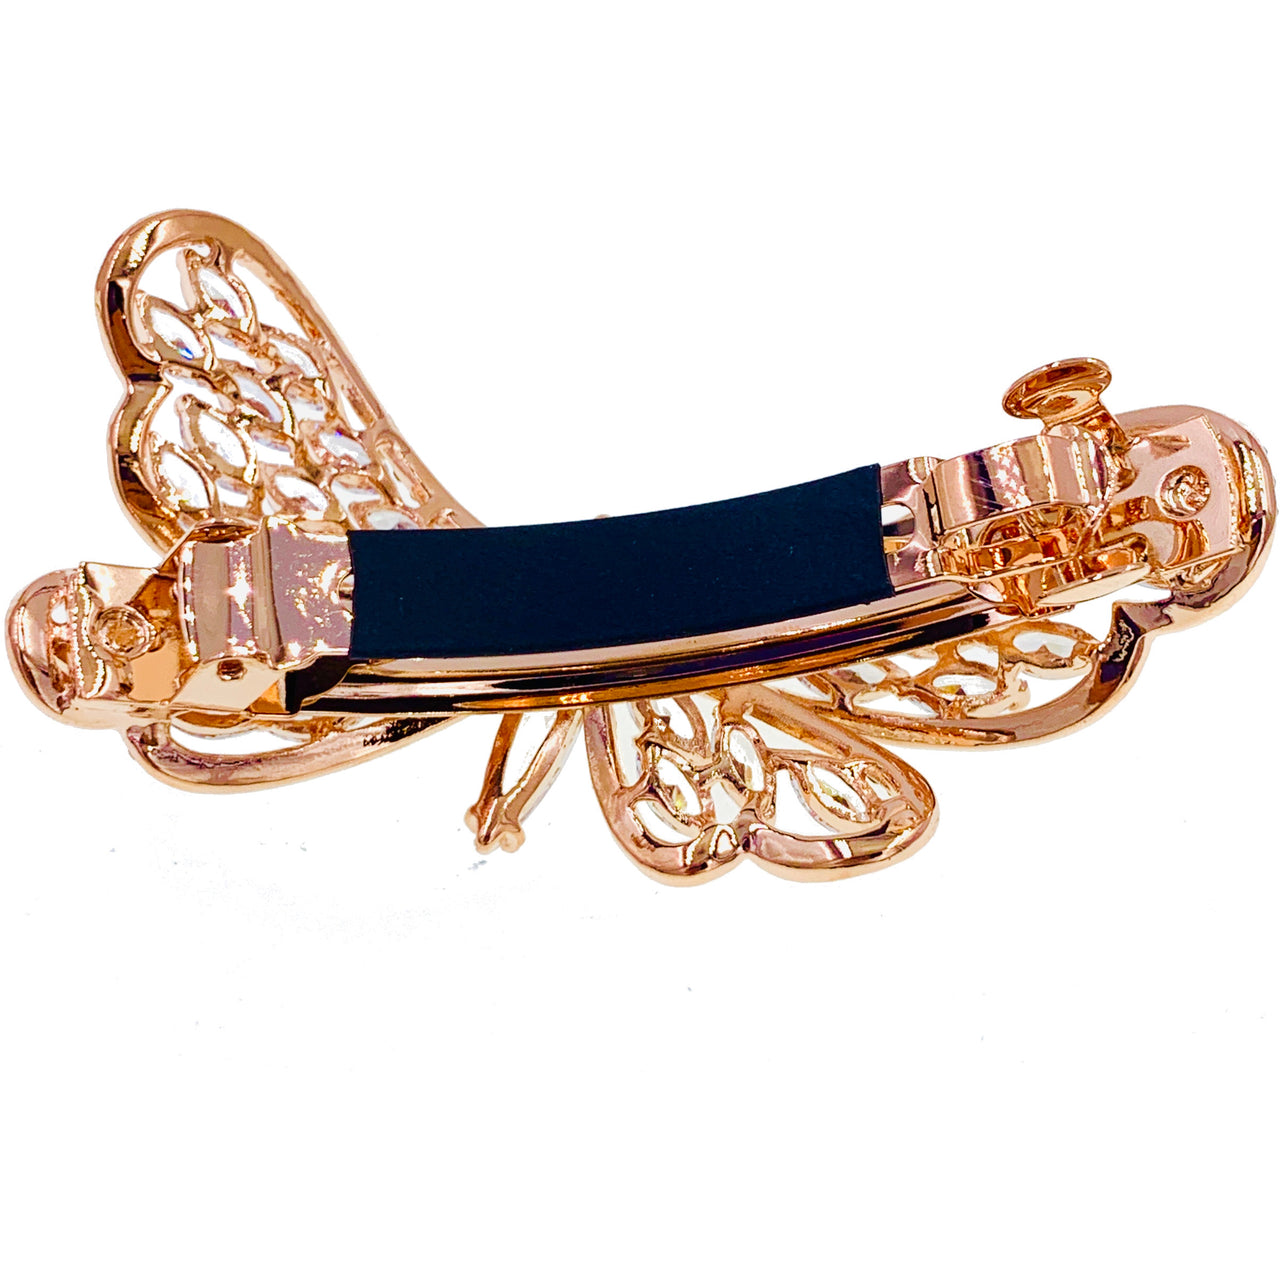 Monique Dragonfly Barrette Cubic Zirconia CZ Crystal gold base clear purple pink brown amber, Barrette - MOGHANT